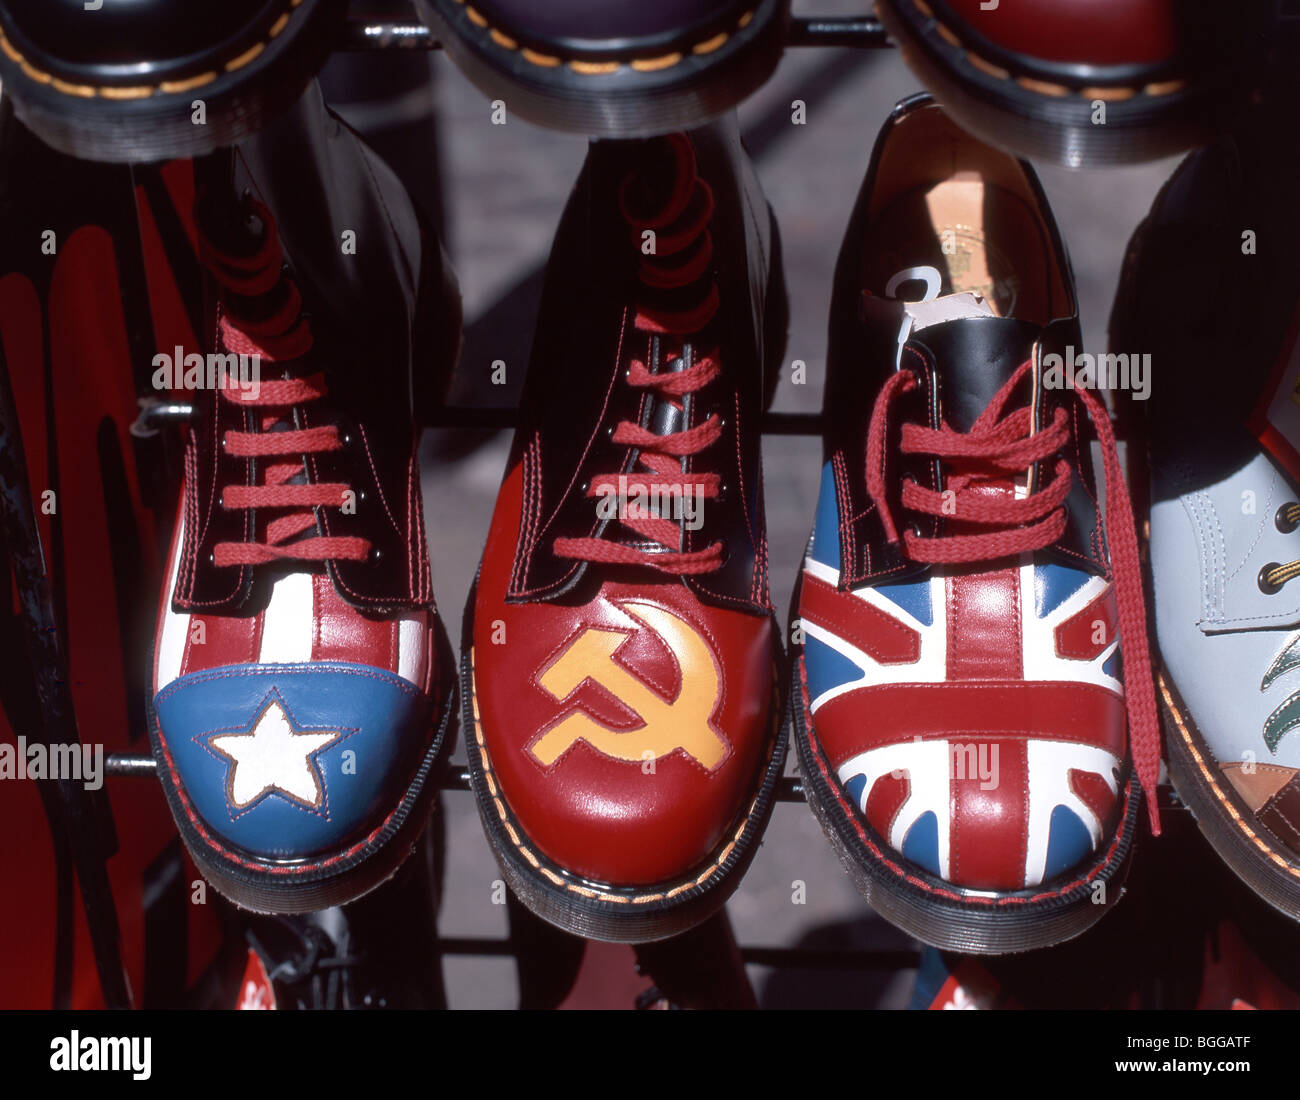 Doc Martens Shoes High Resolution Stock Photography and Images - Alamy